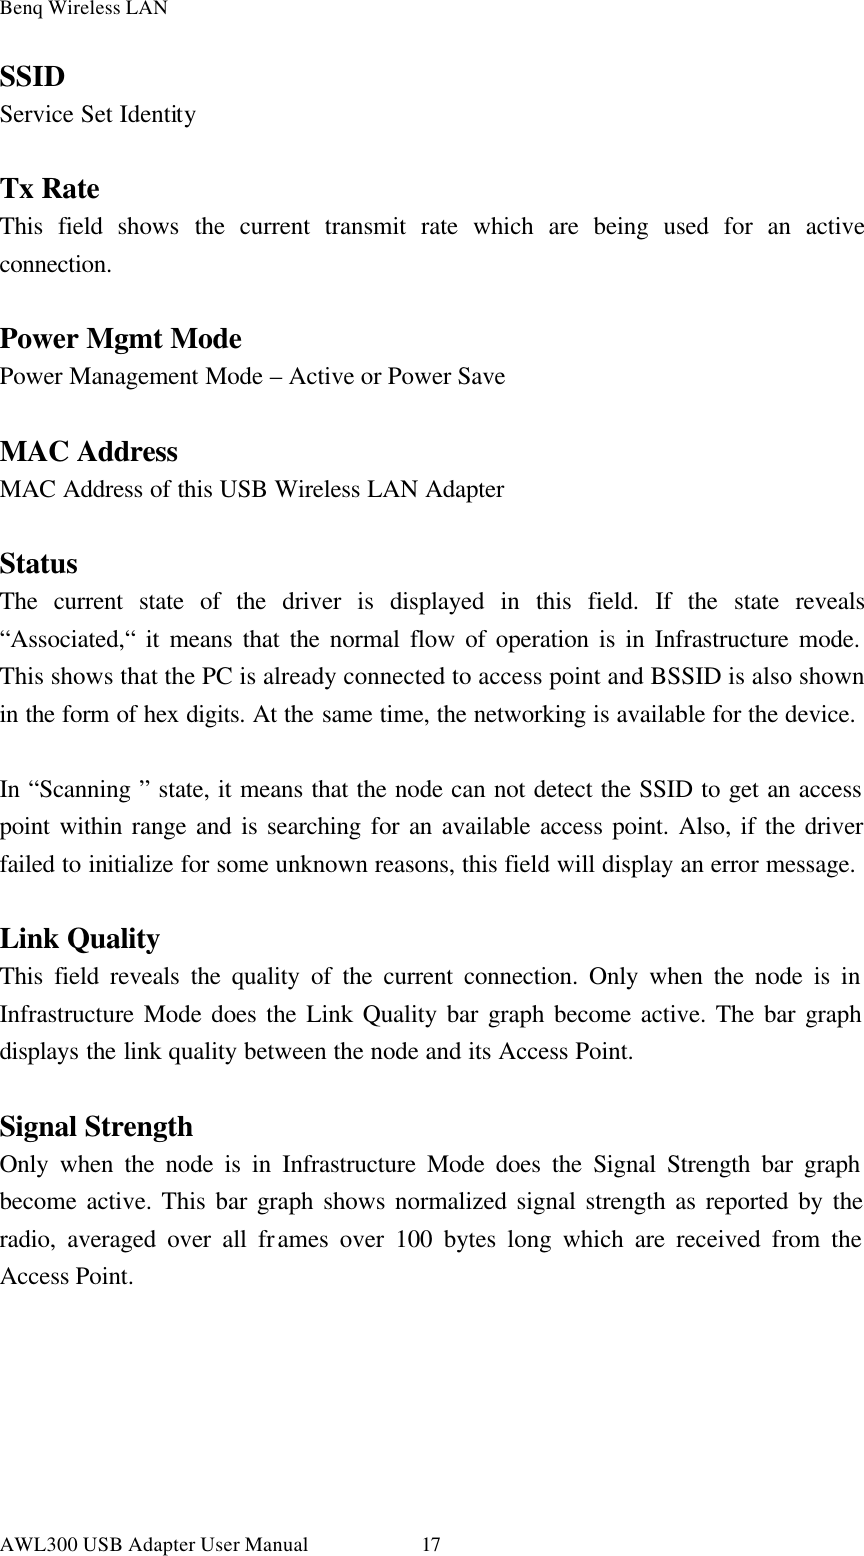 Benq Wireless LAN AWL300 USB Adapter User Manual 17 SSID Service Set Identity  Tx Rate This field shows the current transmit rate which are being used for an active connection.  Power Mgmt Mode Power Management Mode – Active or Power Save  MAC Address MAC Address of this USB Wireless LAN Adapter  Status The current state of the driver is displayed in this field. If the state reveals “Associated,“ it means that the normal flow of operation is in Infrastructure mode. This shows that the PC is already connected to access point and BSSID is also shown in the form of hex digits. At the same time, the networking is available for the device.  In “Scanning ” state, it means that the node can not detect the SSID to get an access point within range and is searching for an available access point. Also, if the driver failed to initialize for some unknown reasons, this field will display an error message.  Link Quality This field reveals the quality of the current connection. Only when the node is in Infrastructure Mode does the Link Quality bar graph become active. The bar graph displays the link quality between the node and its Access Point.  Signal Strength Only when the node is in Infrastructure Mode does the Signal Strength bar graph become active. This bar graph shows normalized signal strength as reported by the radio, averaged over all frames over 100 bytes long which are received from the Access Point. 